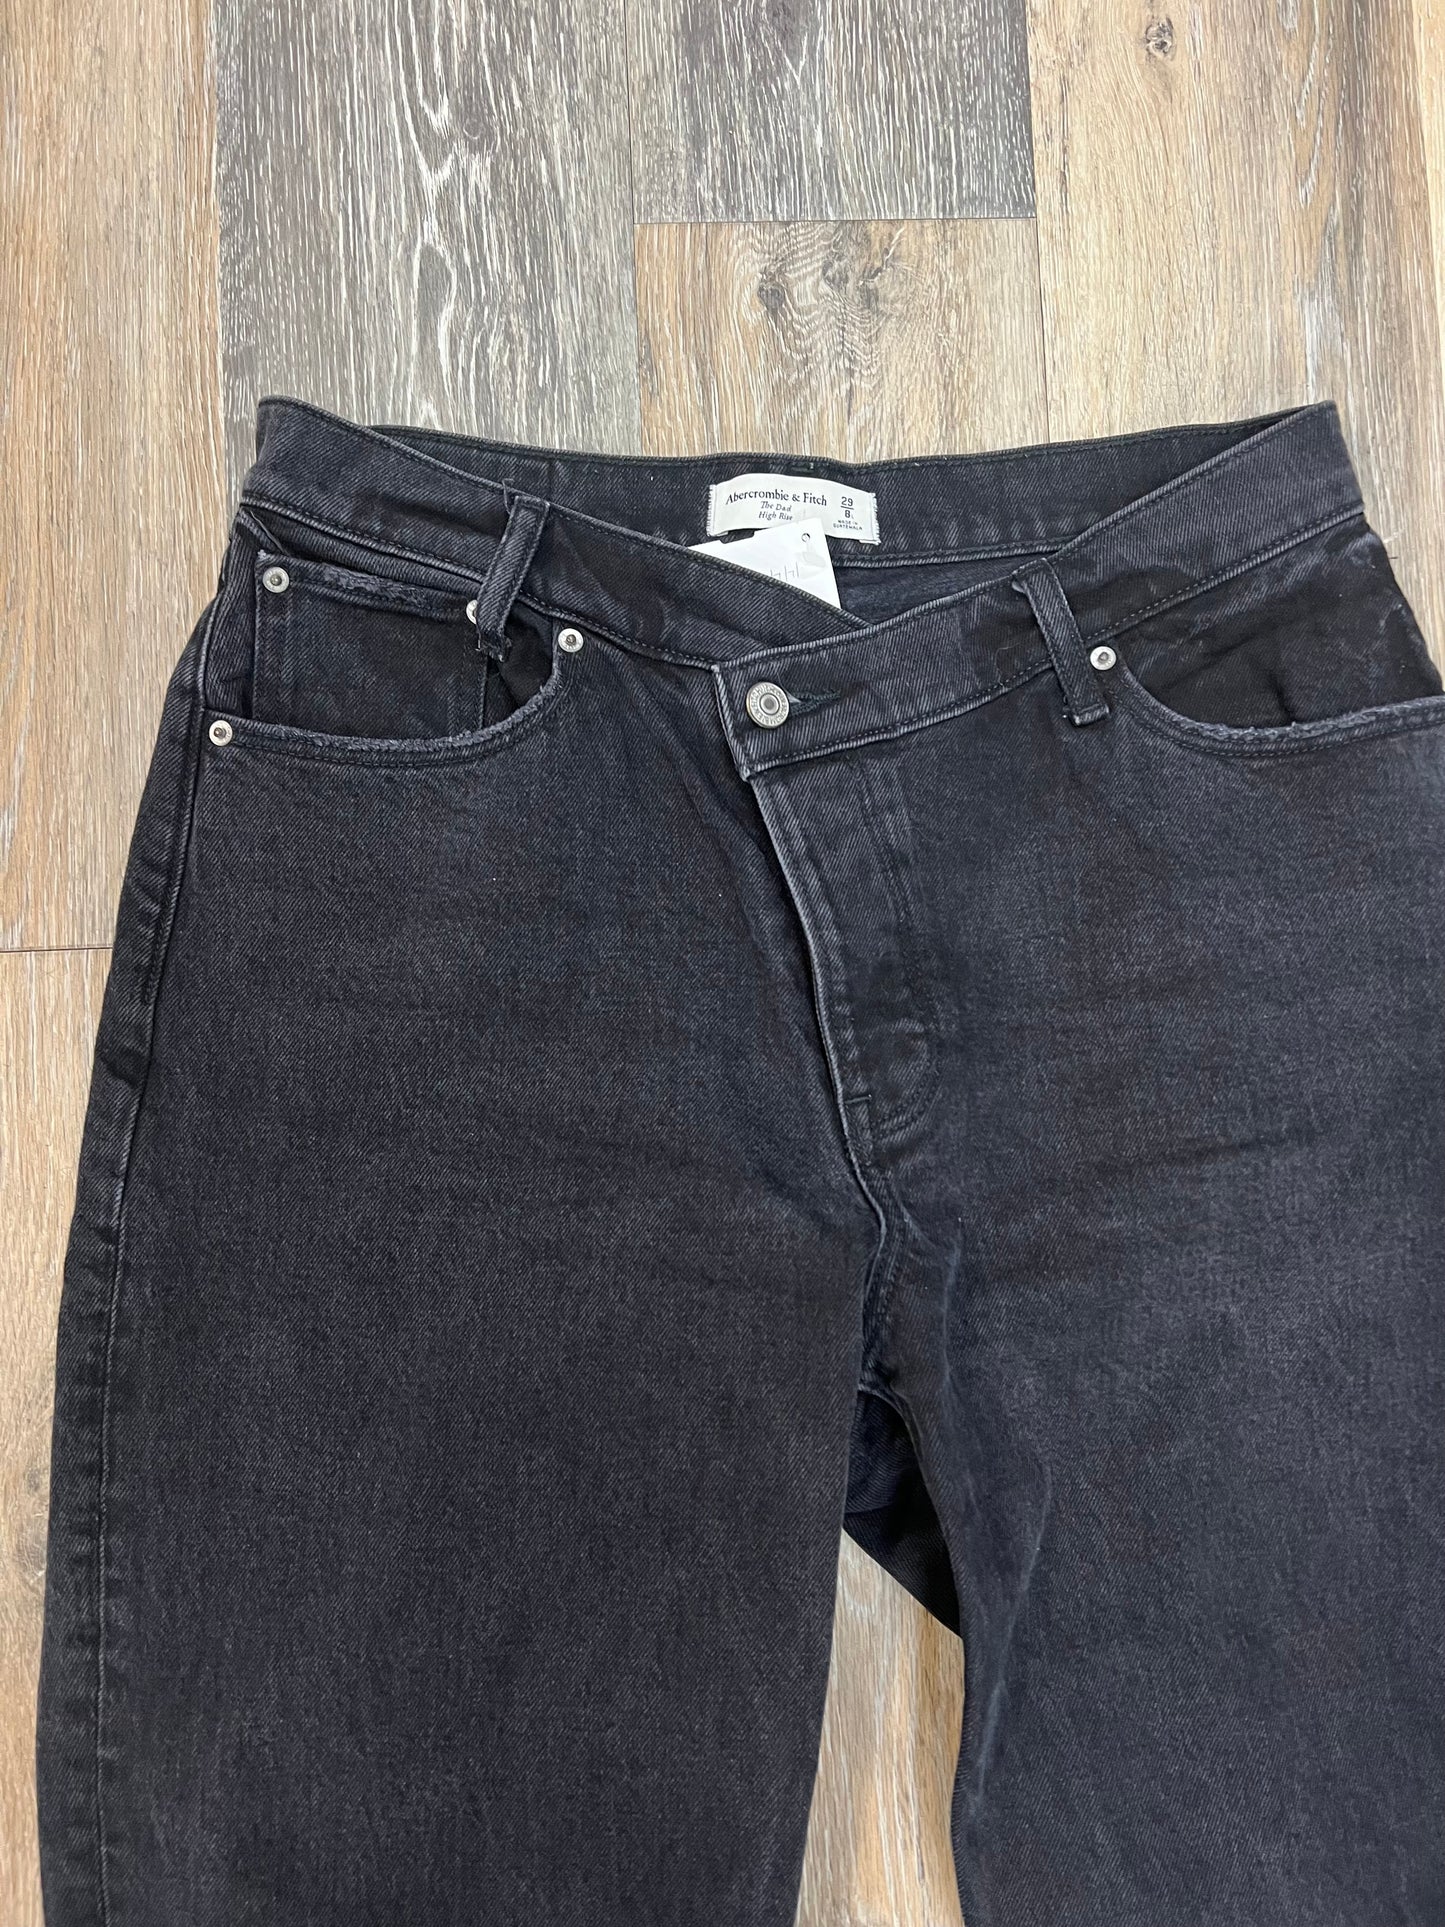 Jeans Straight By Abercrombie And Fitch  Size: 8l